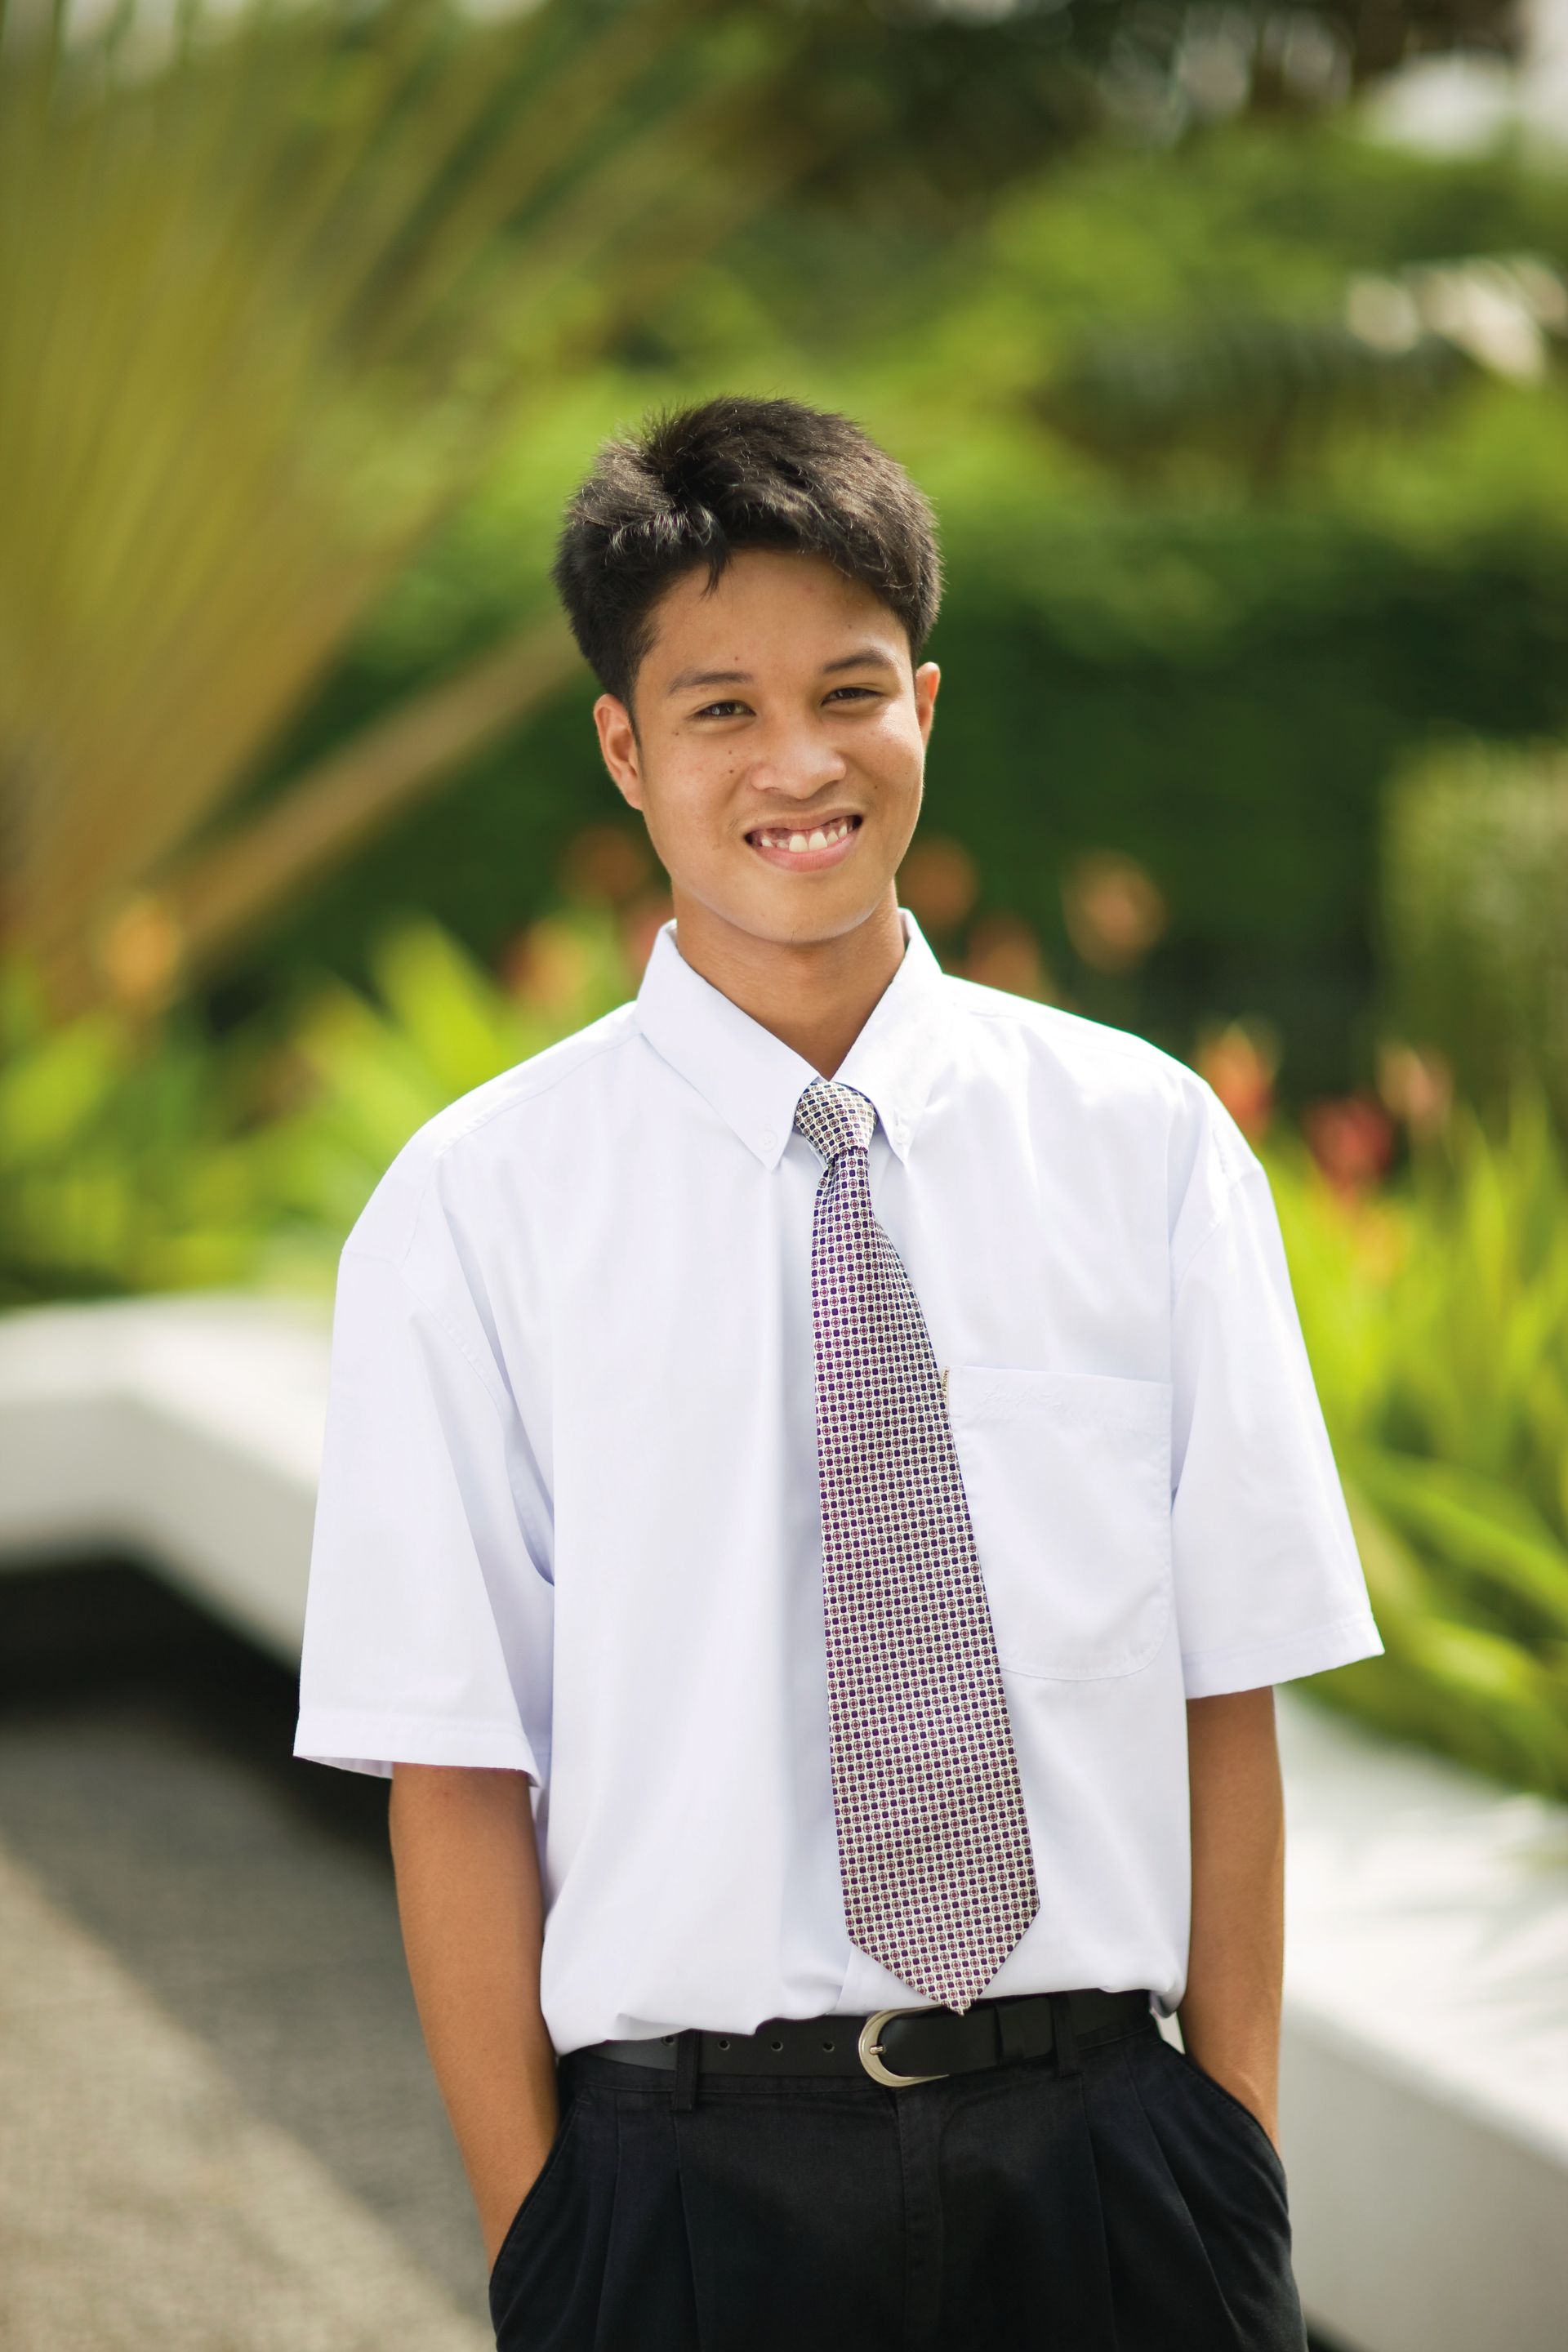 A portrait of a young man in the Philippines wearing Sunday clothes.